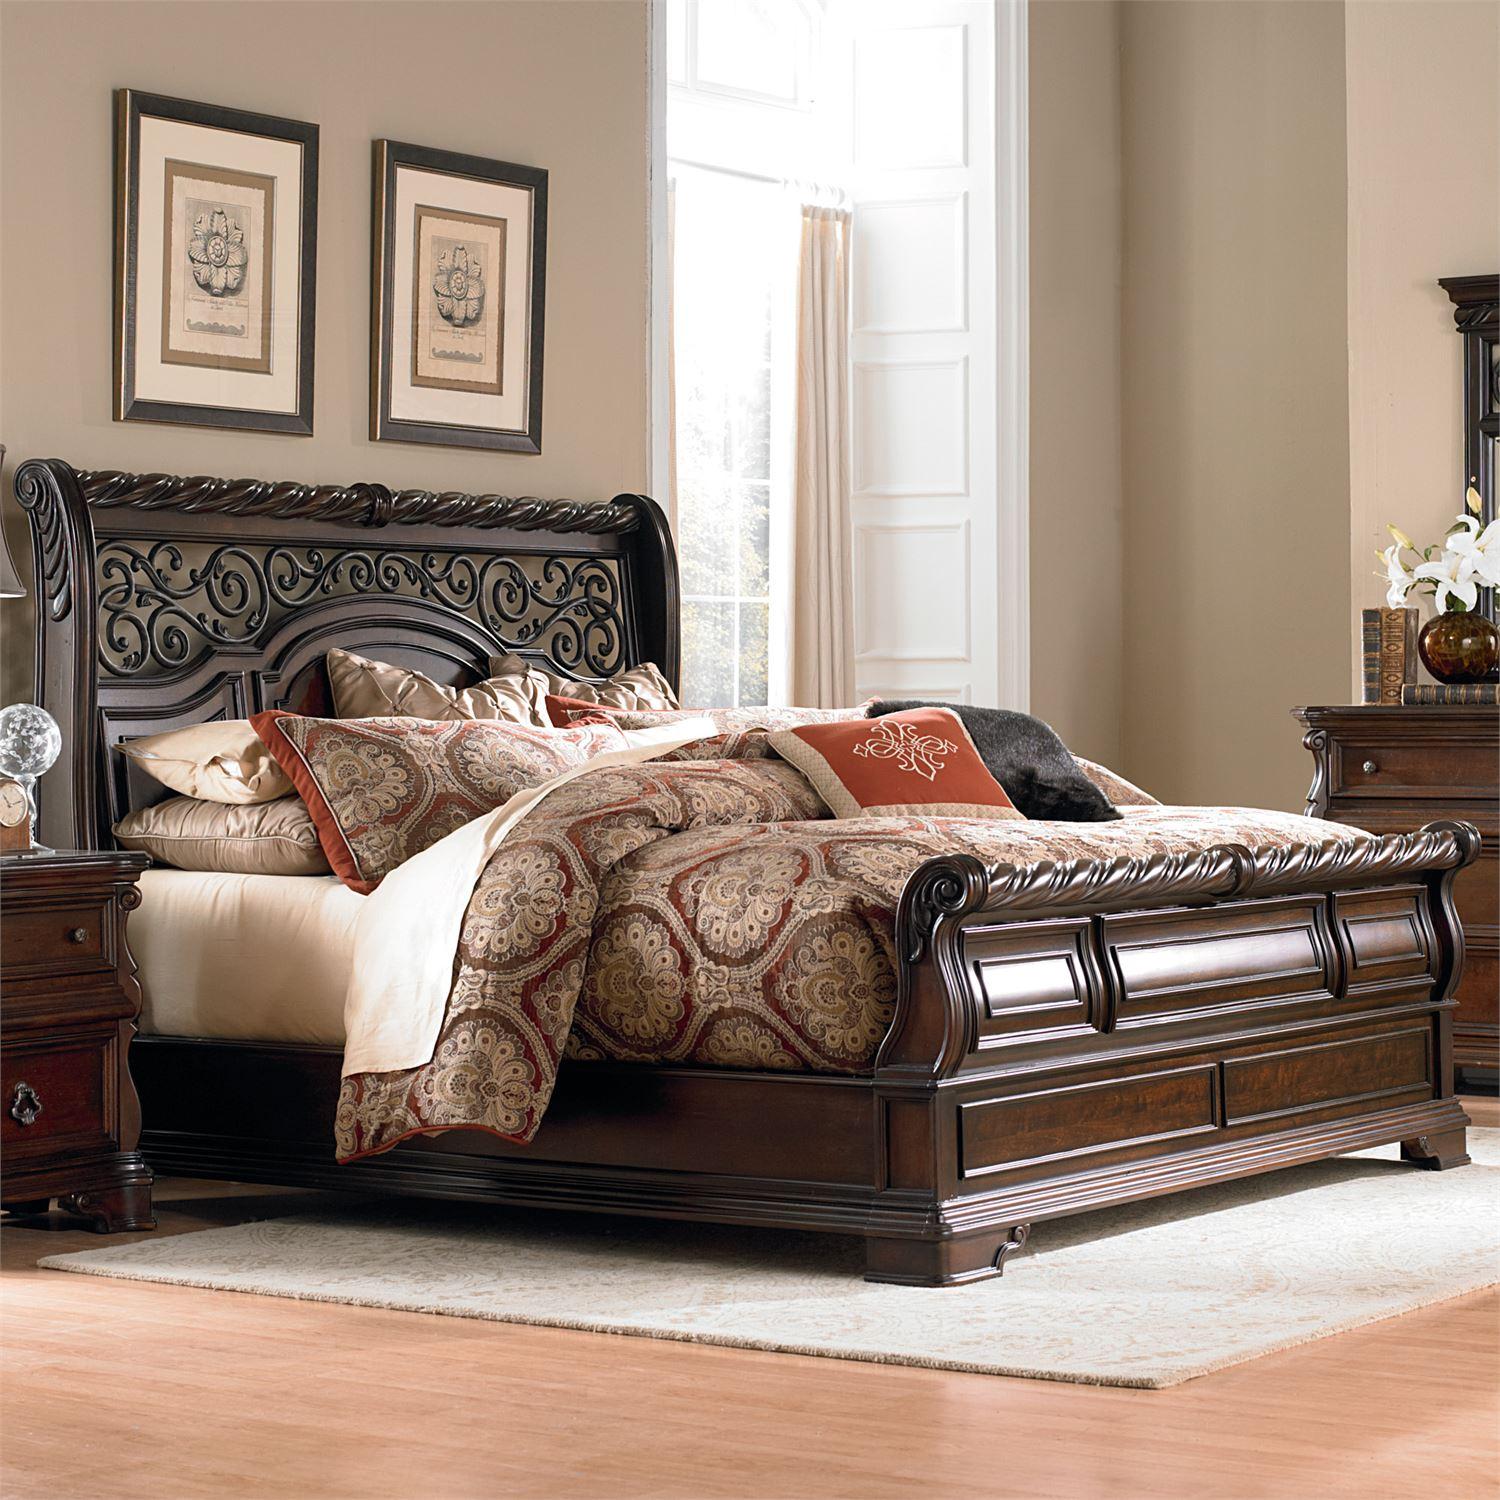 Liberty Furniture Arbor Place 575-BR-KSL Sleigh Bed